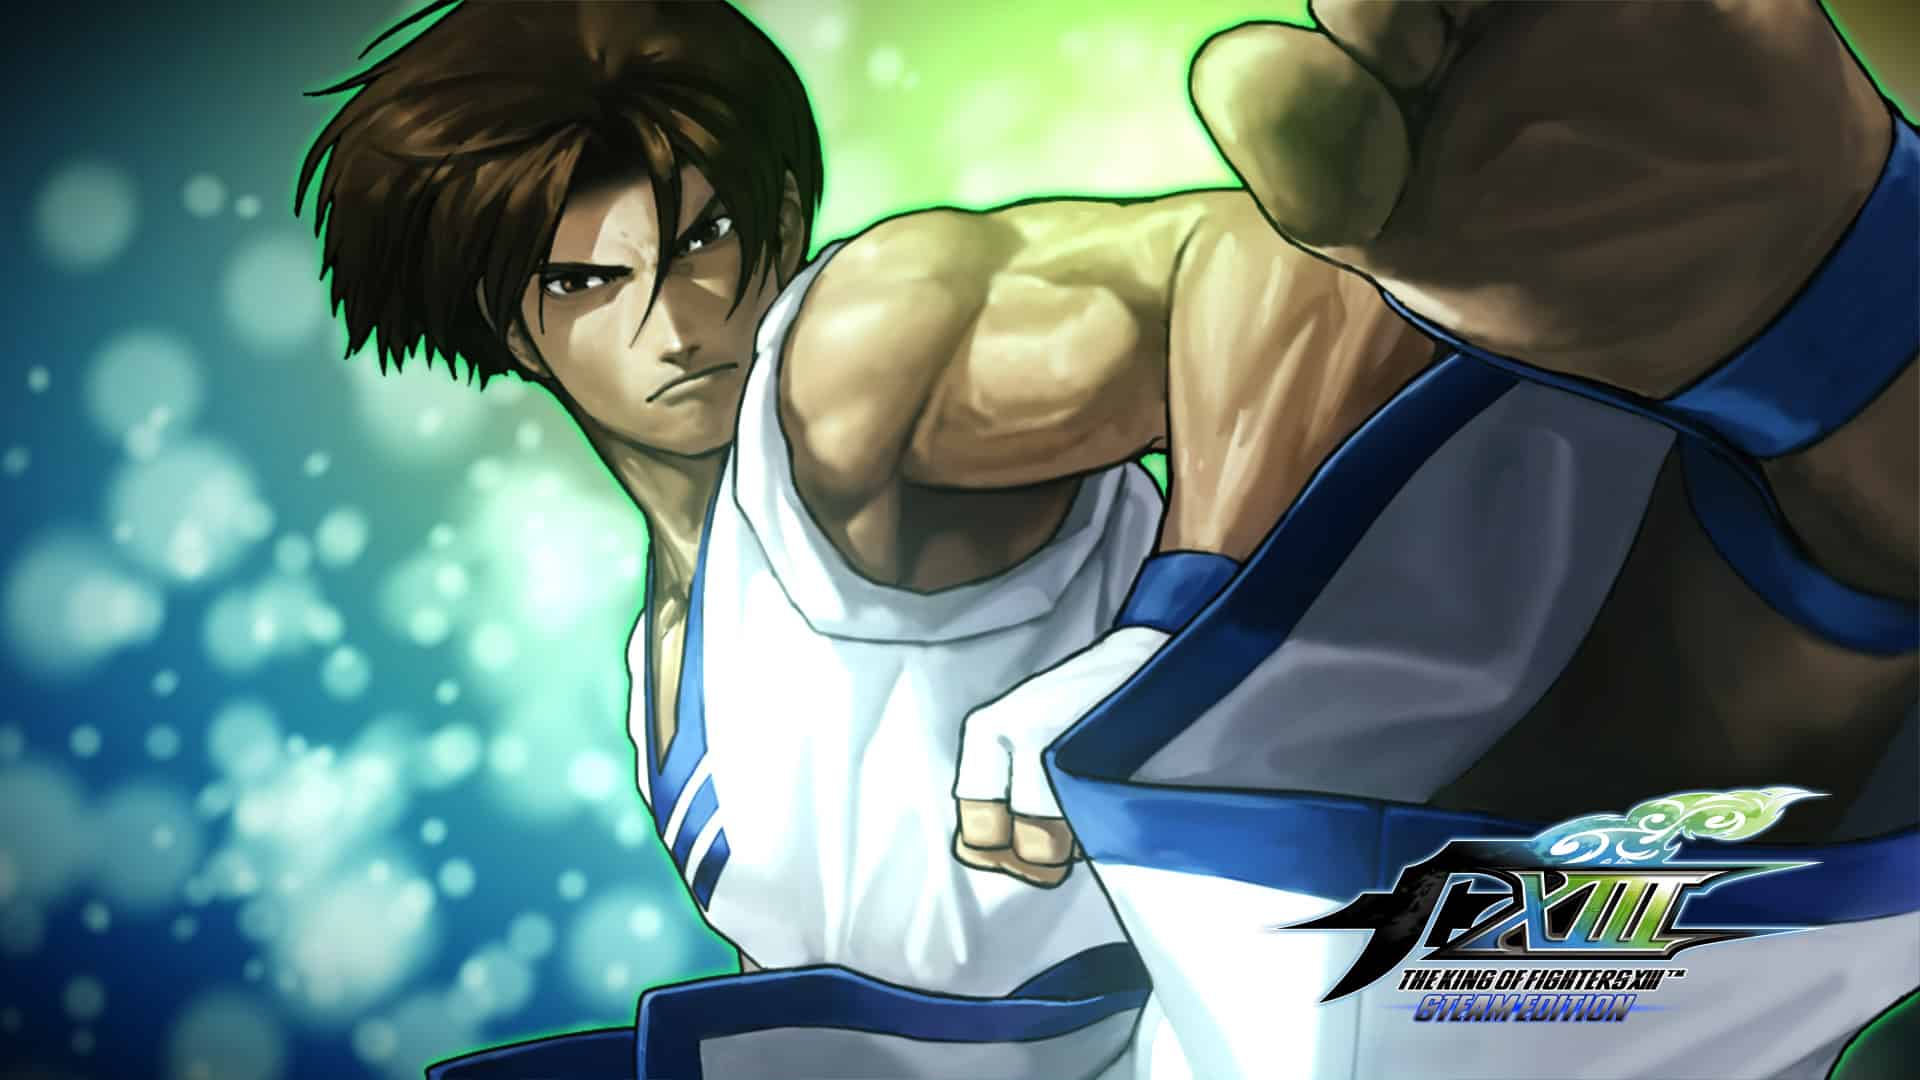 Best Fighting Games - The King of Fighters XIII